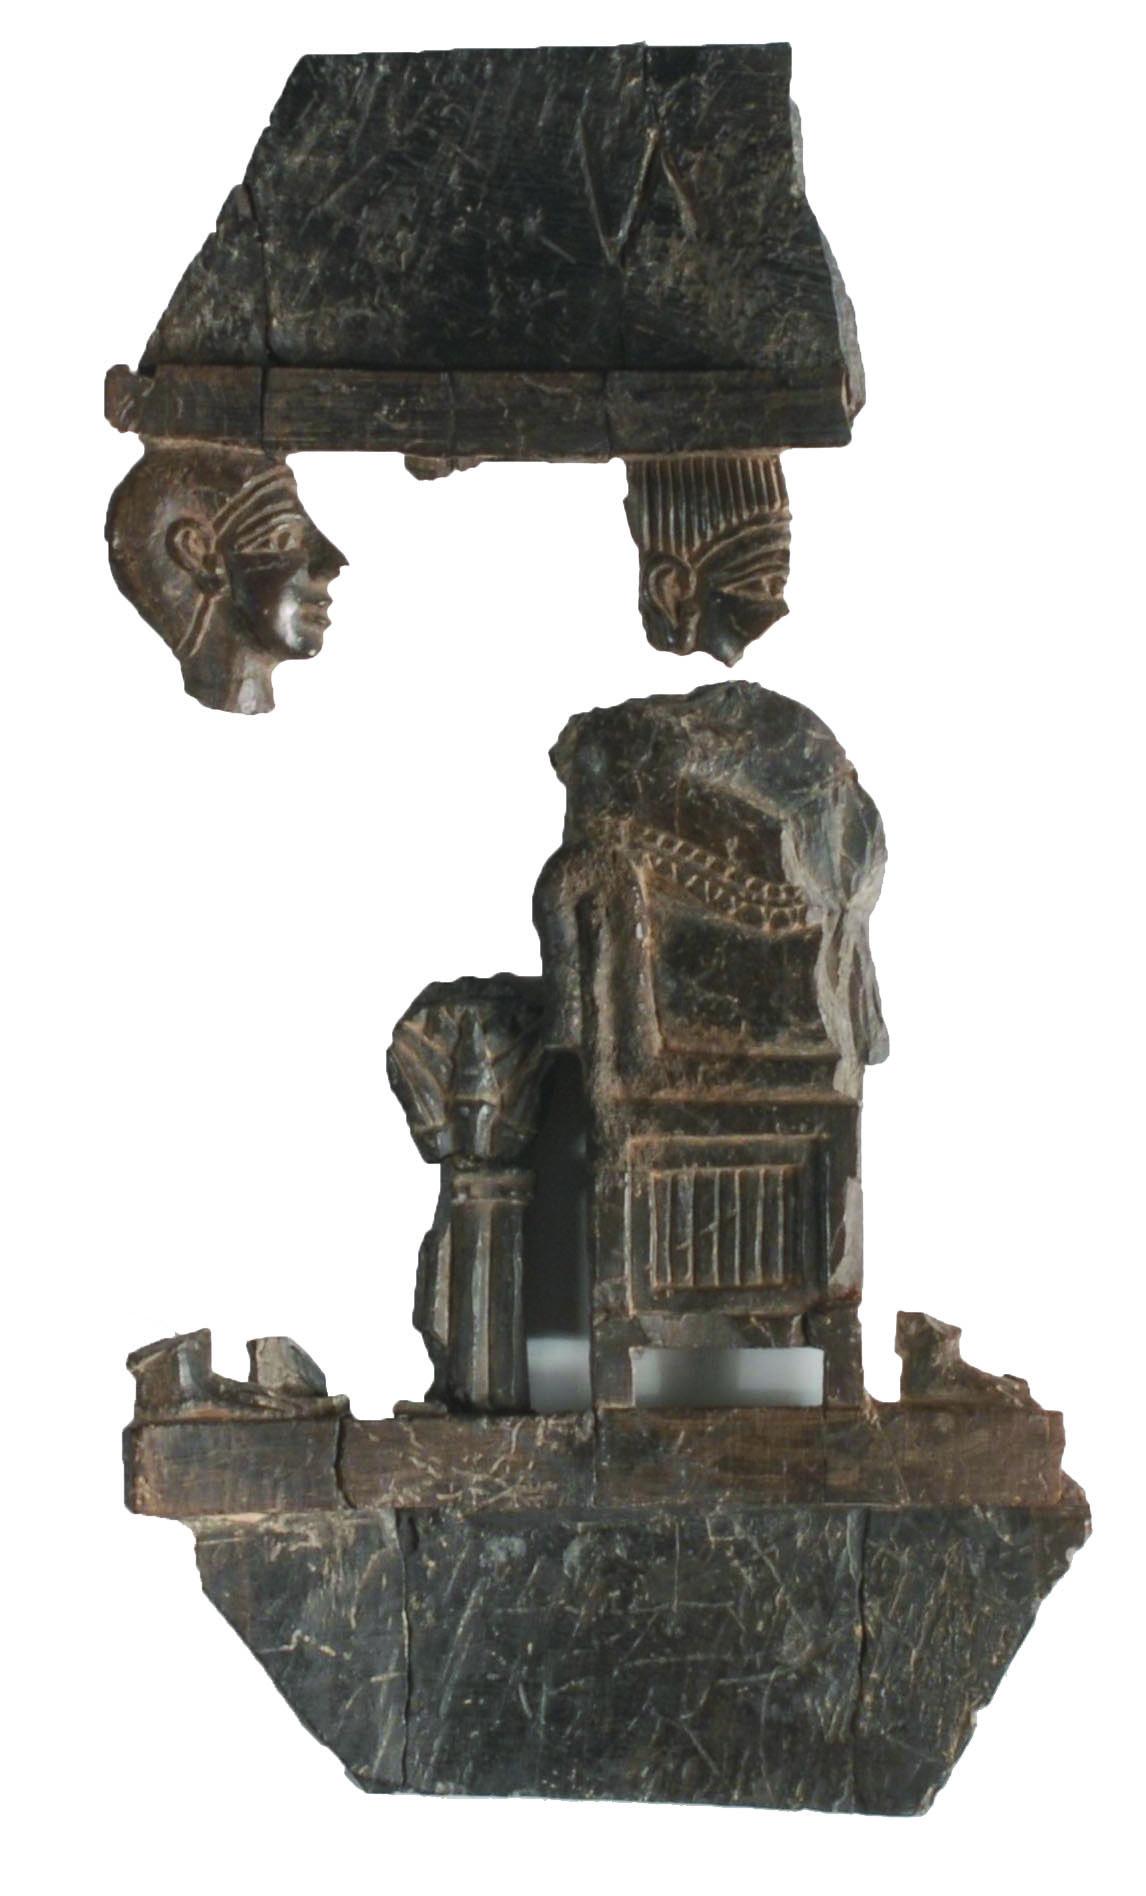 Ivory carving in two disconnected fragments, one with two heads and the other one with a body on a throne.